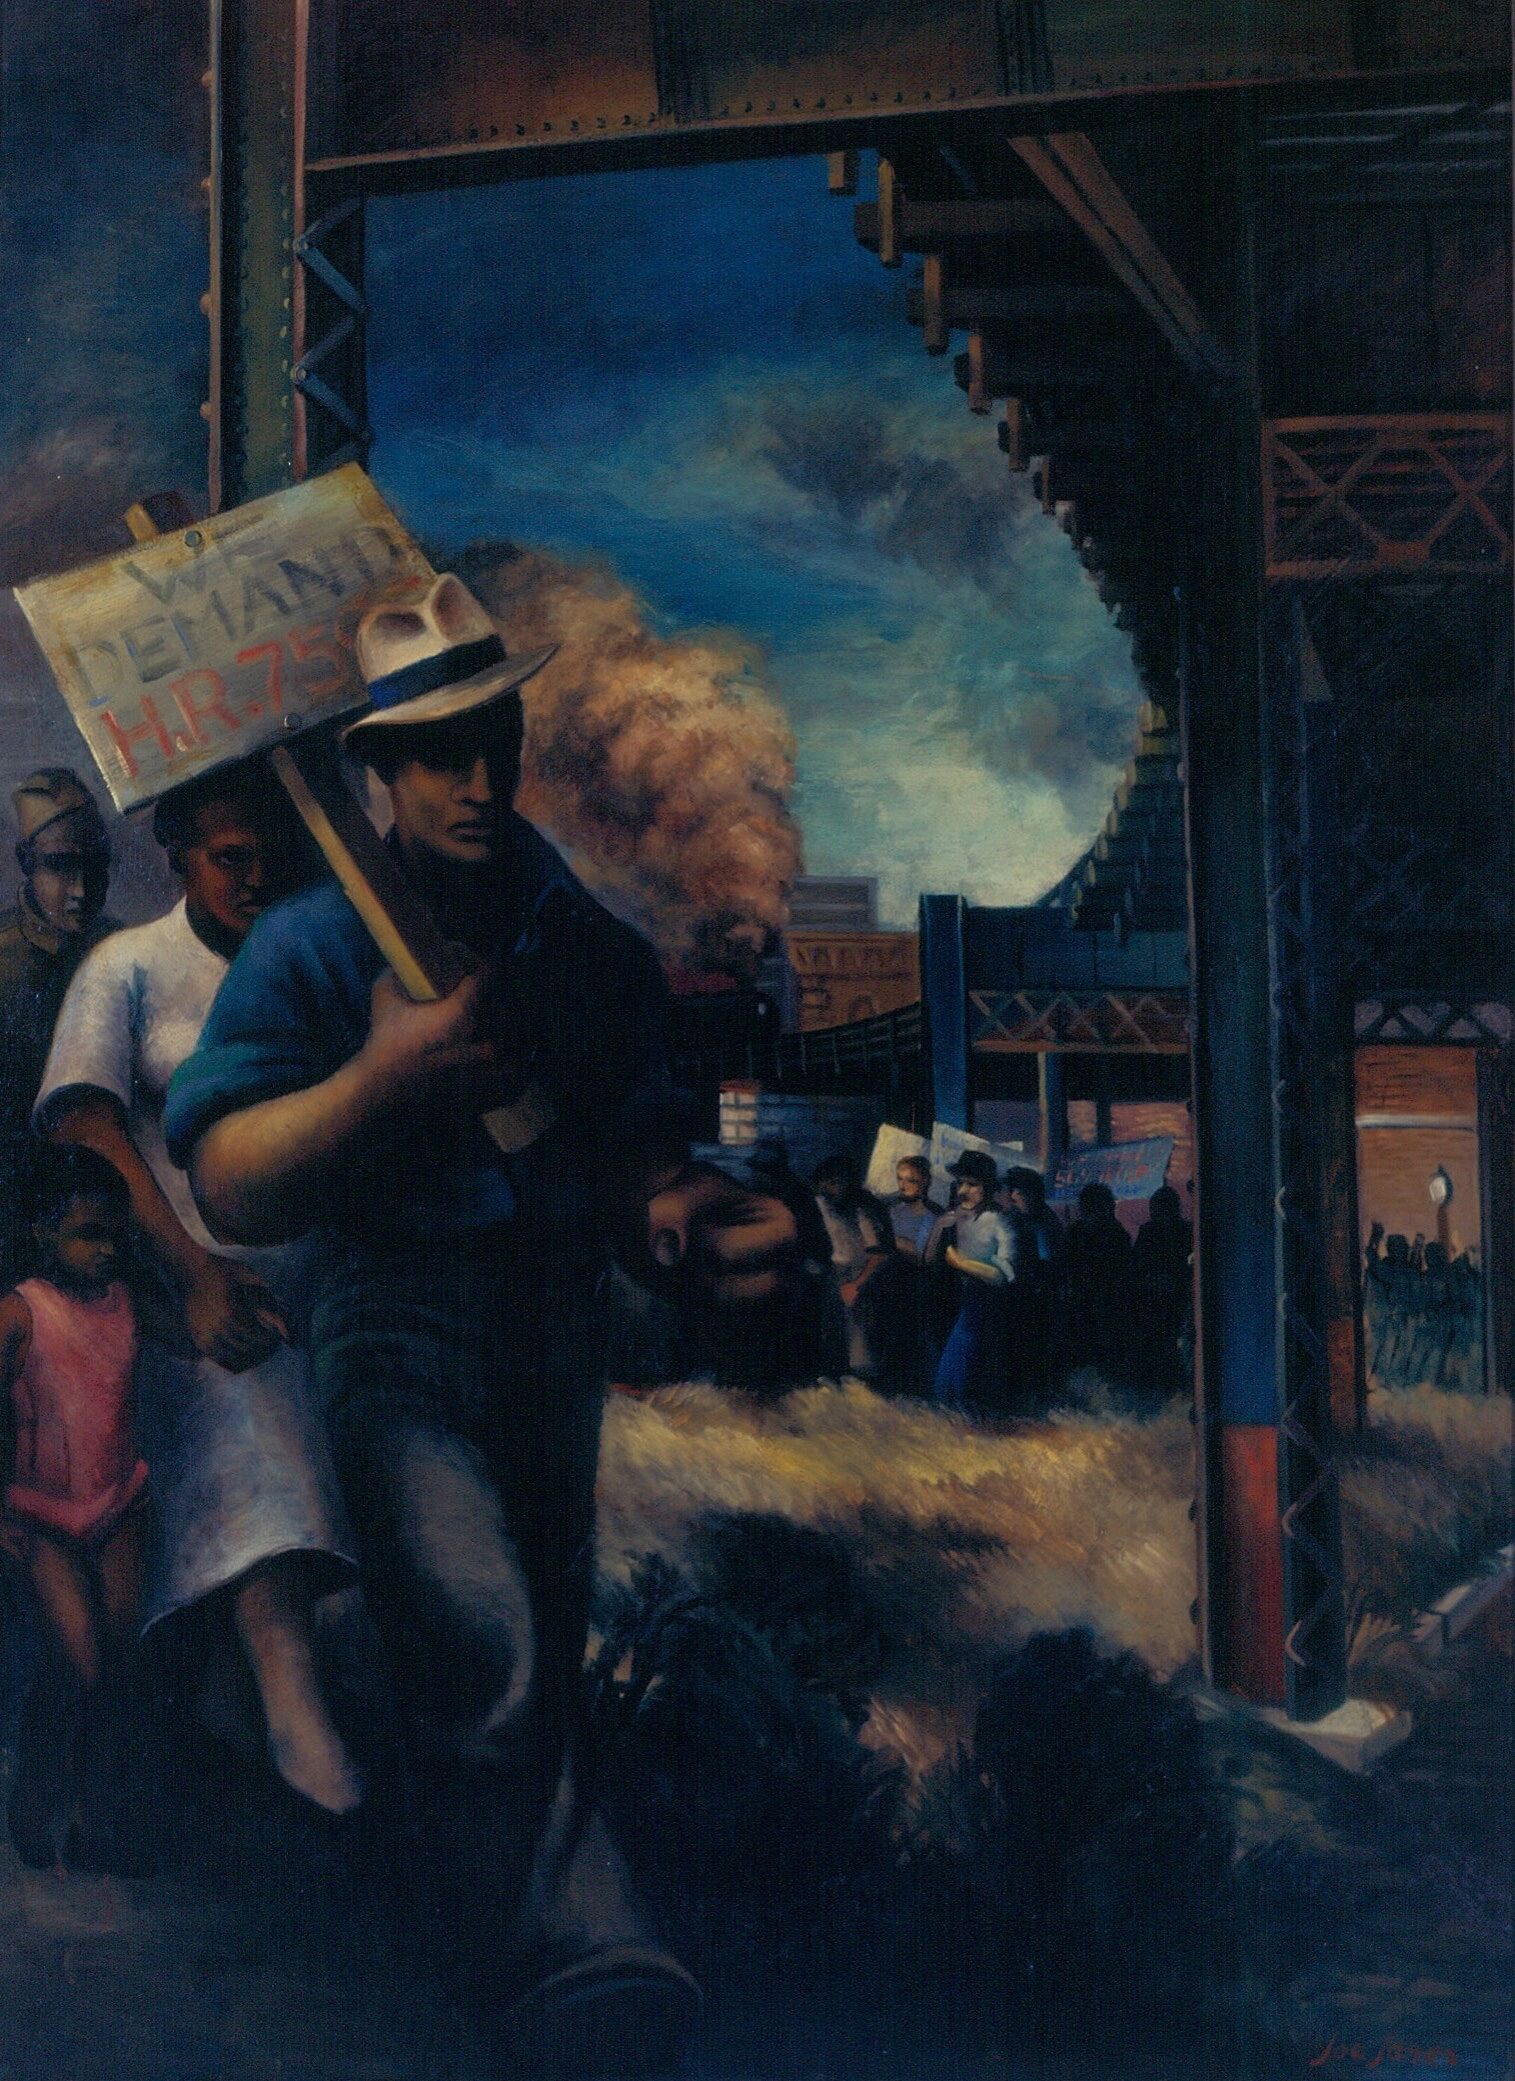 A painting depicting a line of people with picket signs.